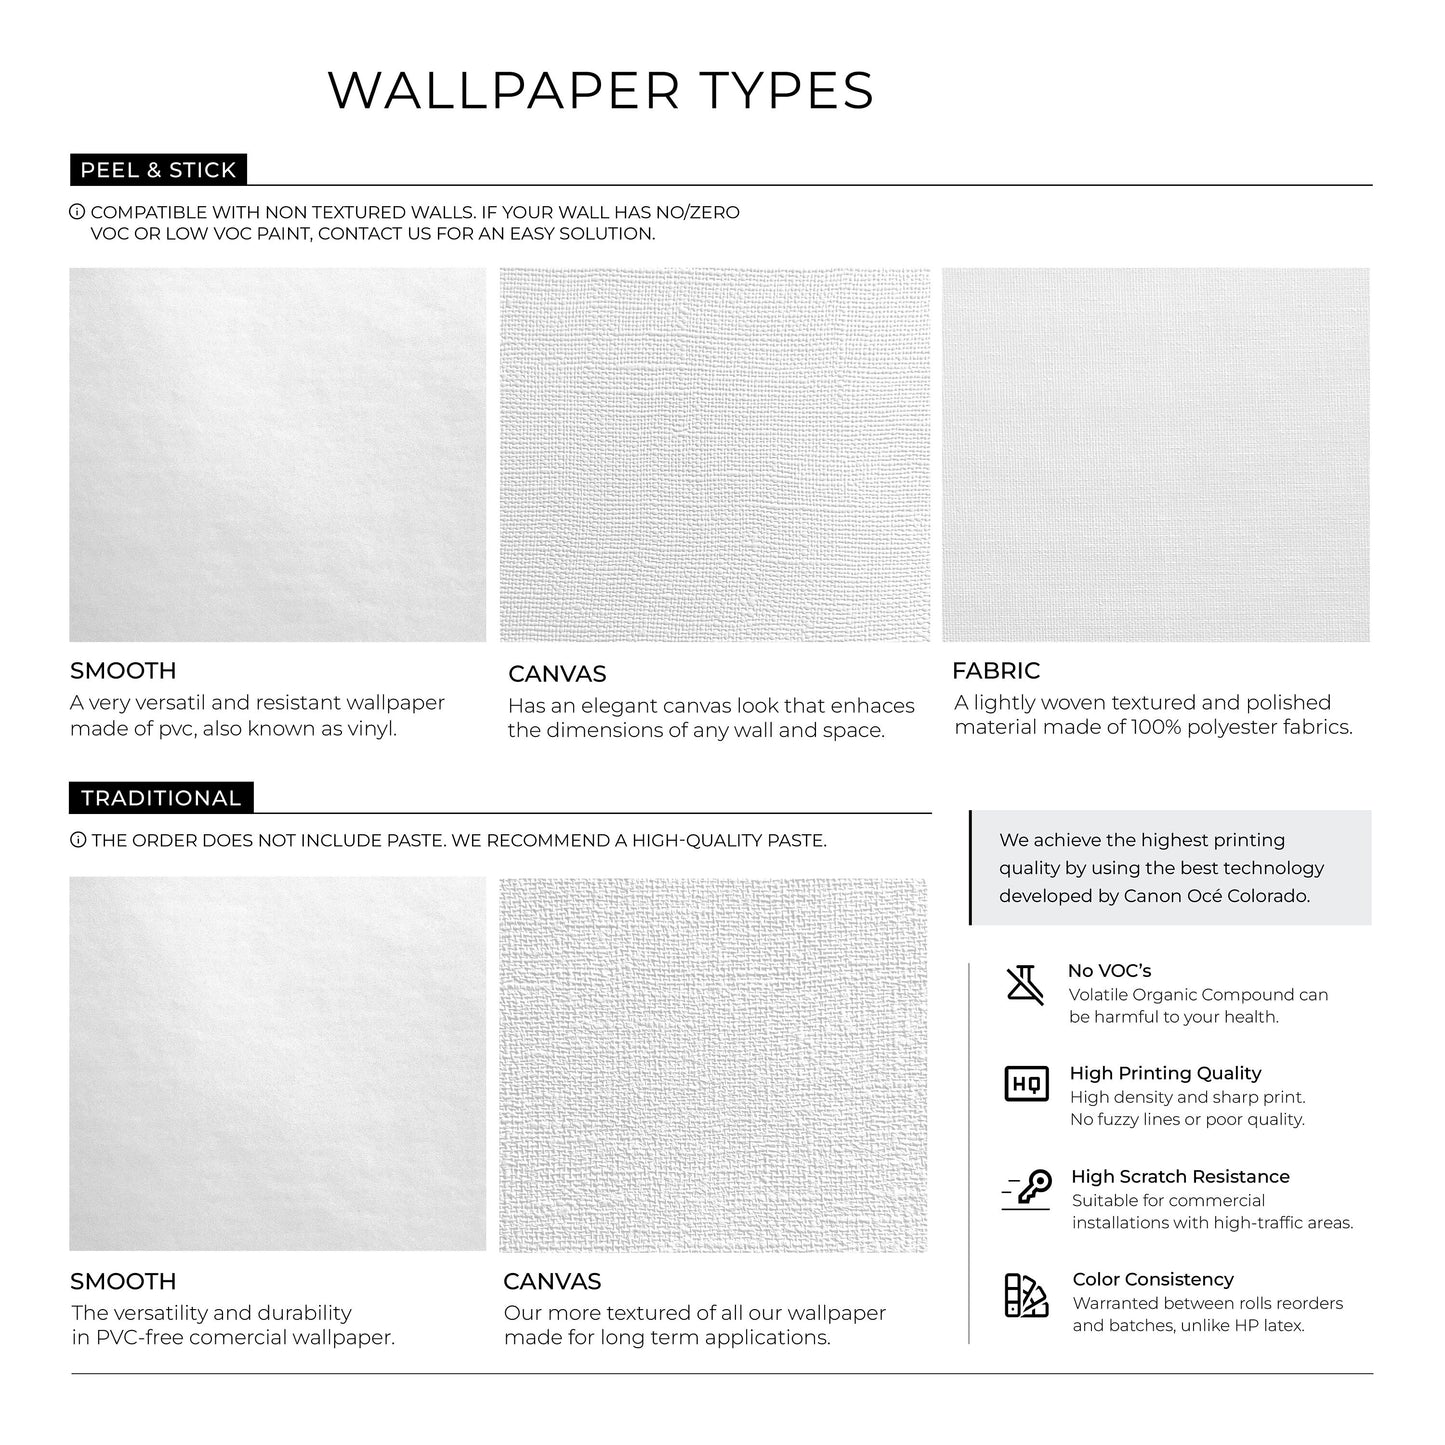 Black and White Wild Flowers Wallpaper / Peel and Stick Wallpaper Removable Wallpaper Home Decor Wall Art Wall Decor Room Decor - C839